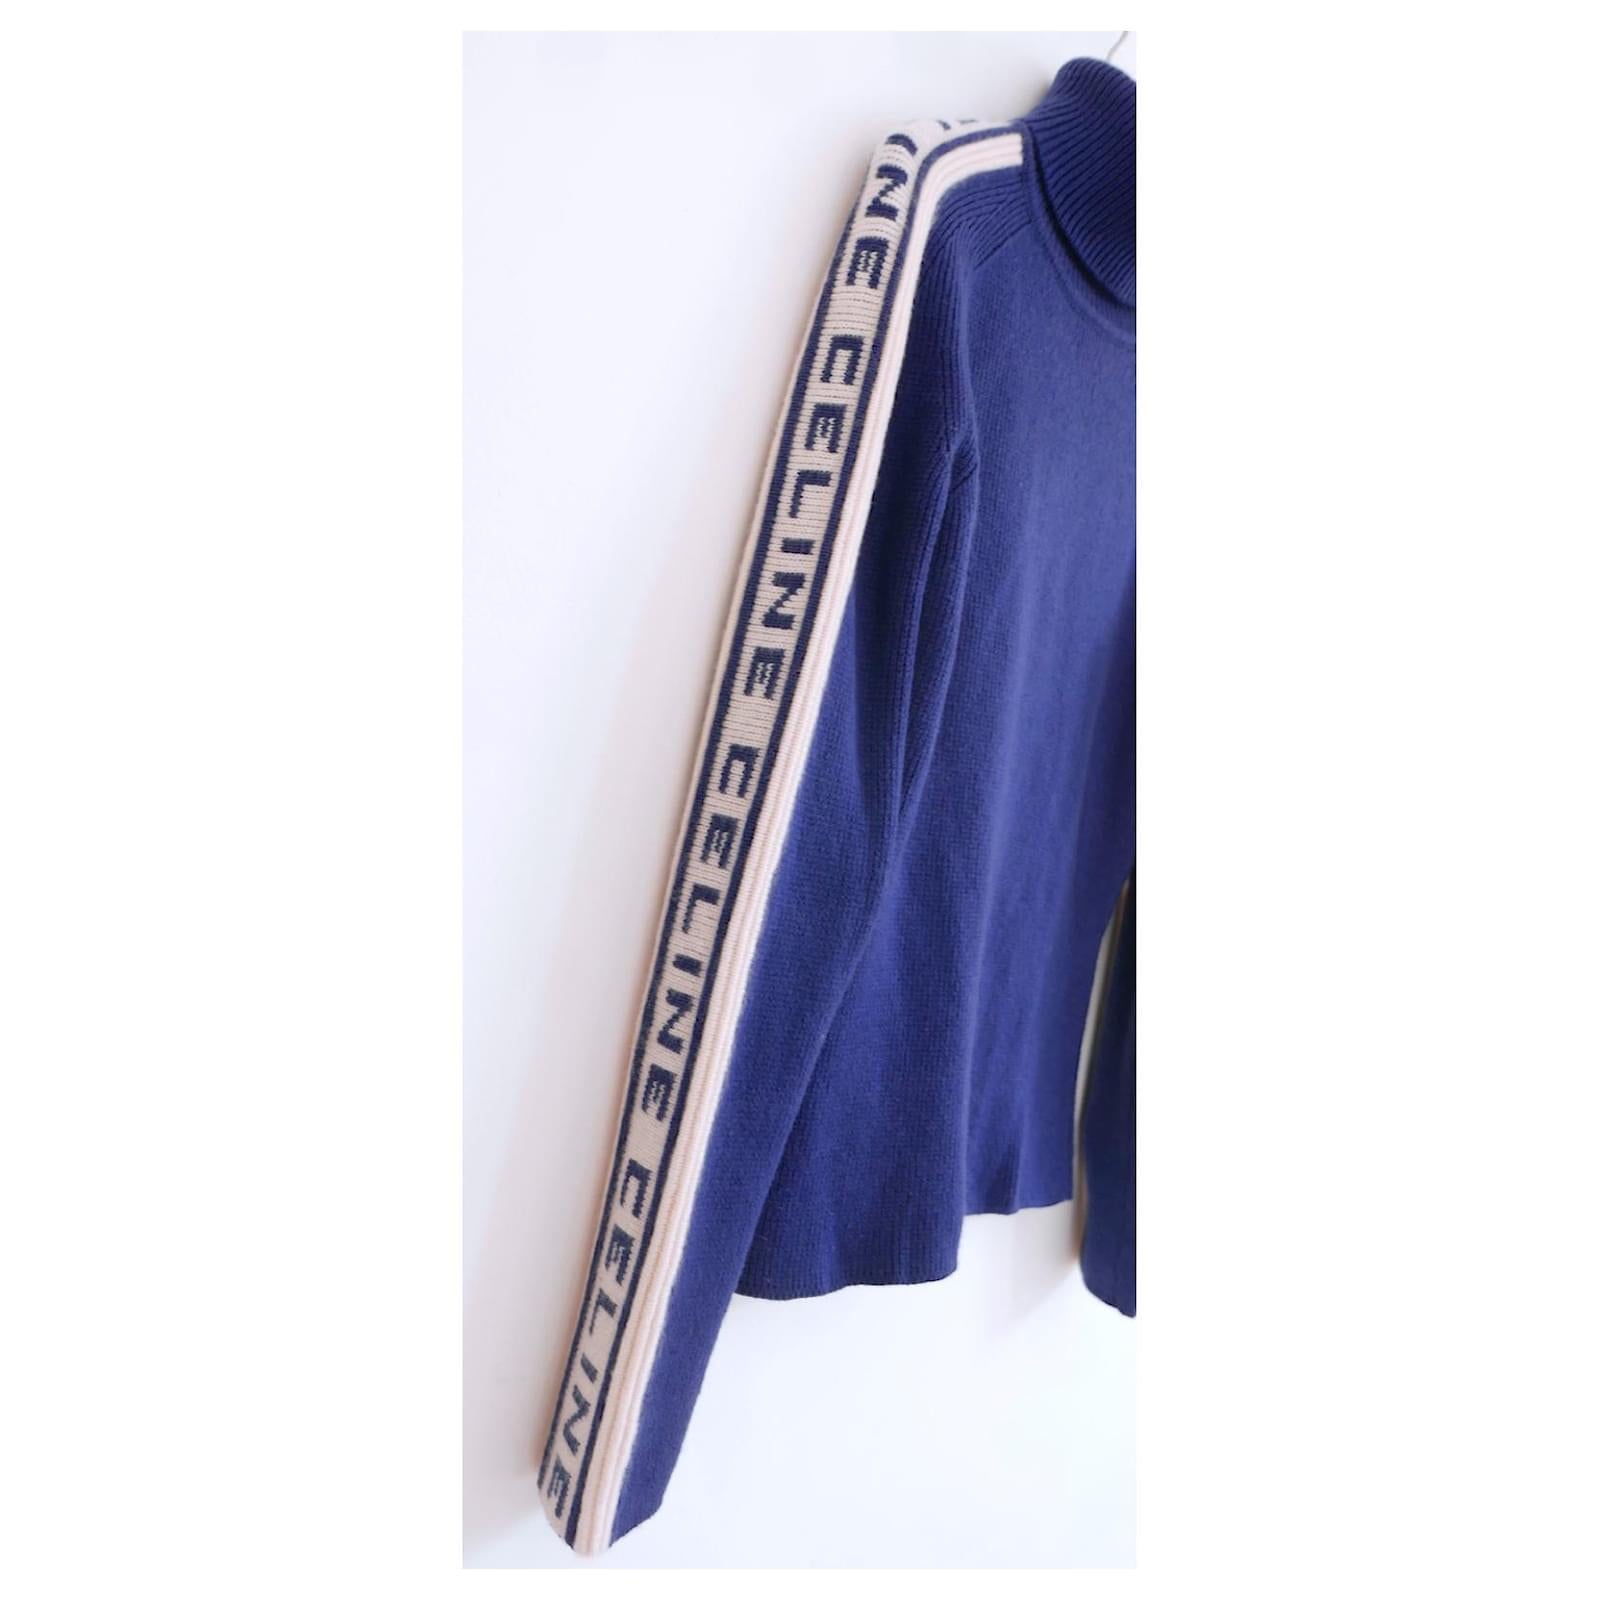 Super rare, ultra cool vintage Celine logo sleeve sweater - from the Fall 1999 Catwalk. worn once. I have never seen one of these come up for sale in this colour before. Made from very soft, thick blue cashmere with textured CELINE logo intarsia